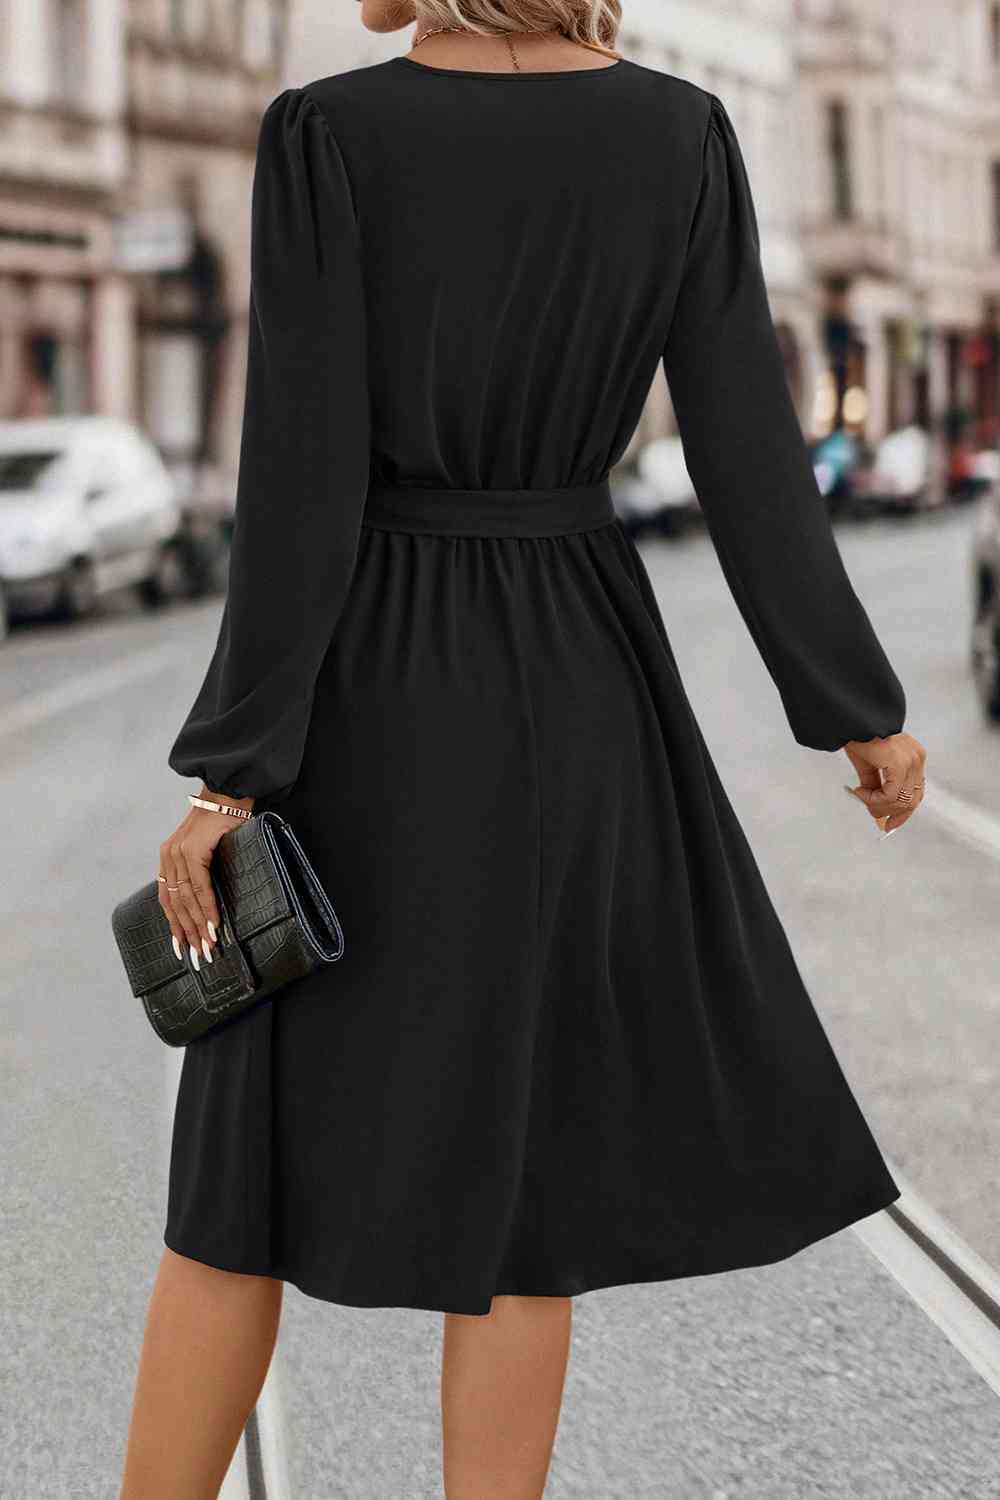 Tie Waist Notched Neck Long Sleeve Dress - Kawaii Stop - Classic, Classic Pumps, Confidence, Dress, Easy Care, Fashion, Long Sleeve Dress, No Stretch, Opaque Sheer, Ship From Overseas, Statement Necklace, Style, Tie Waist Dress, Timeless Fashion, Women's Clothing, YO